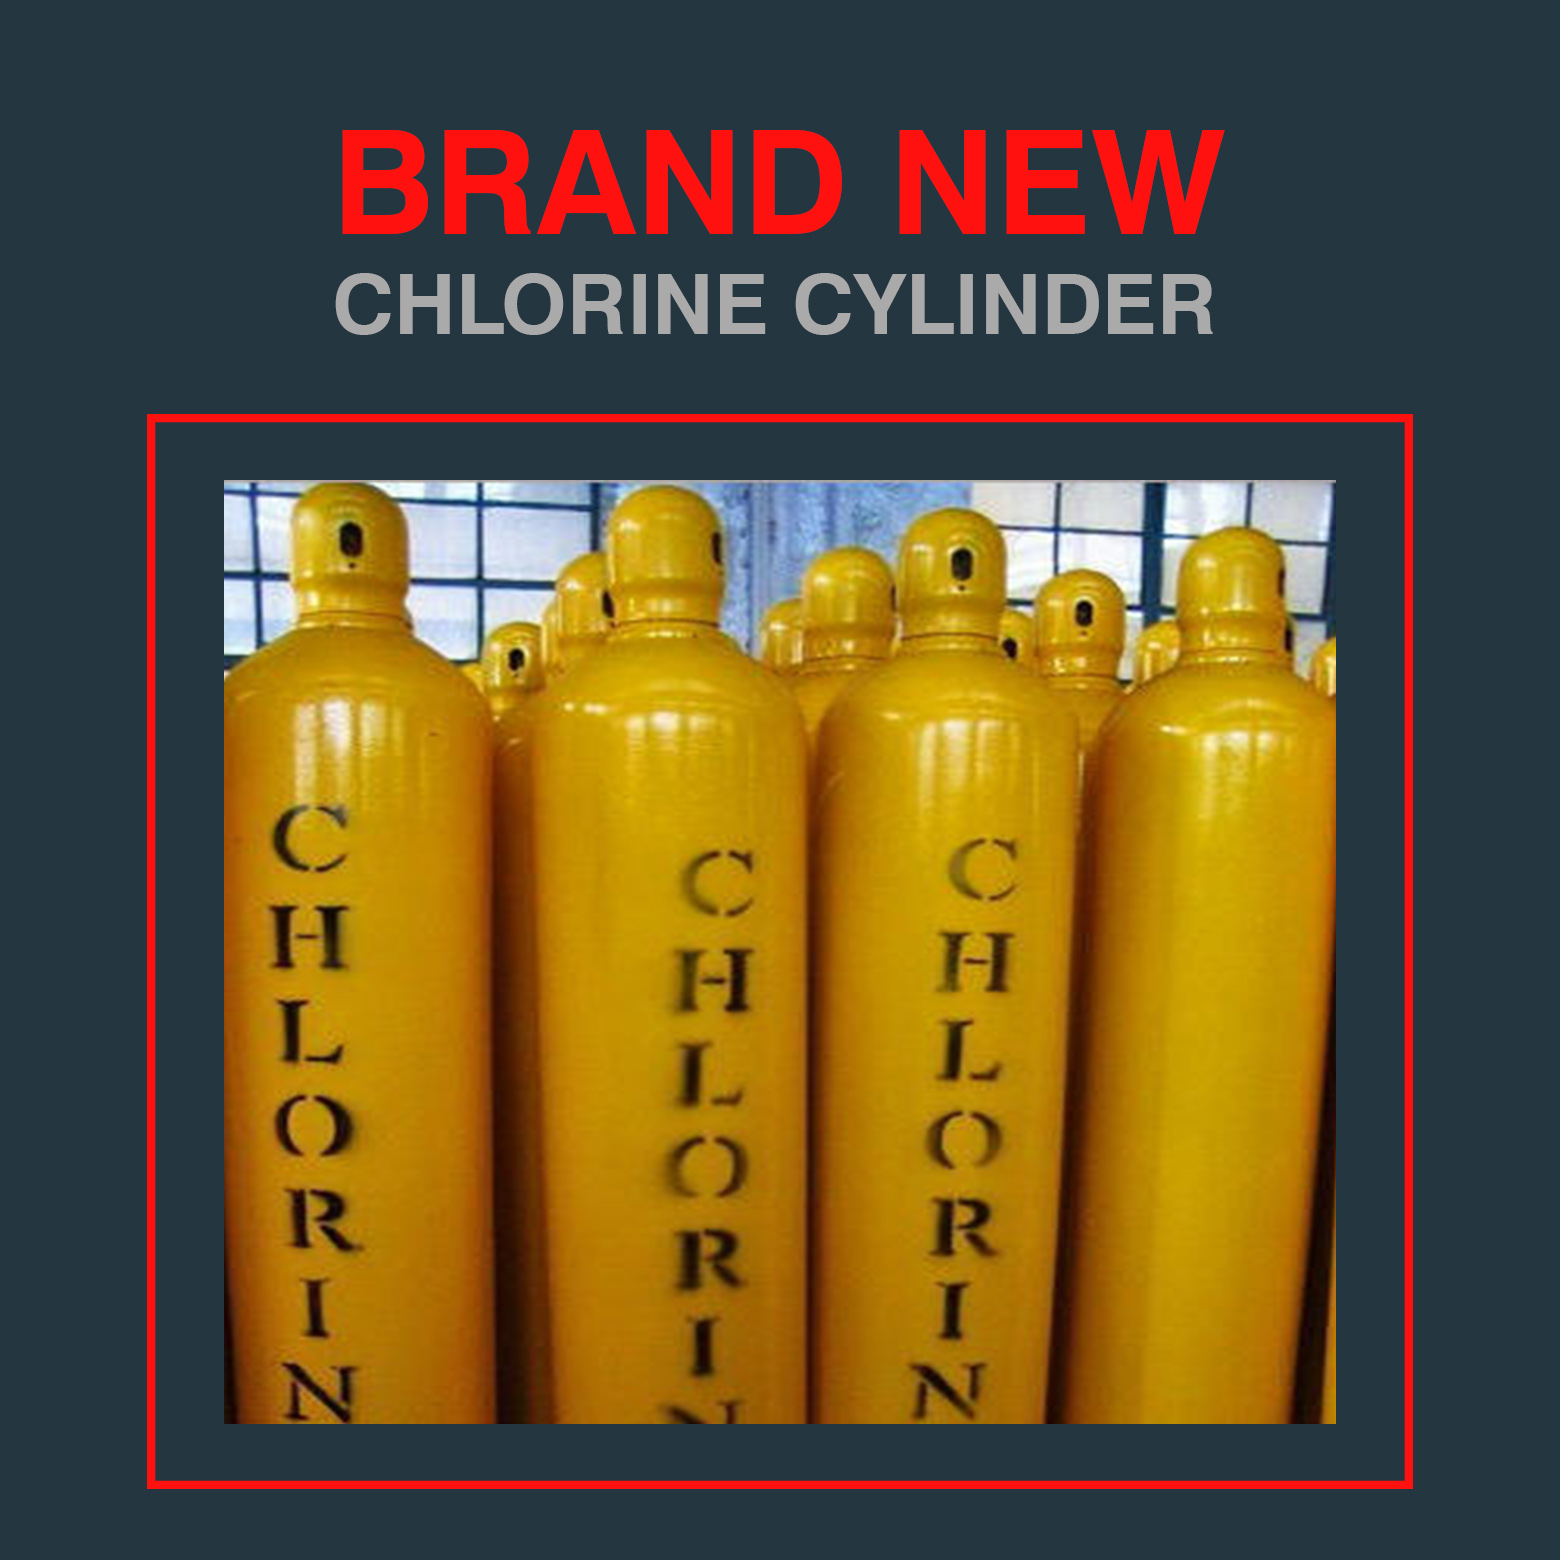 Brand New Chlorine Cylinders In 